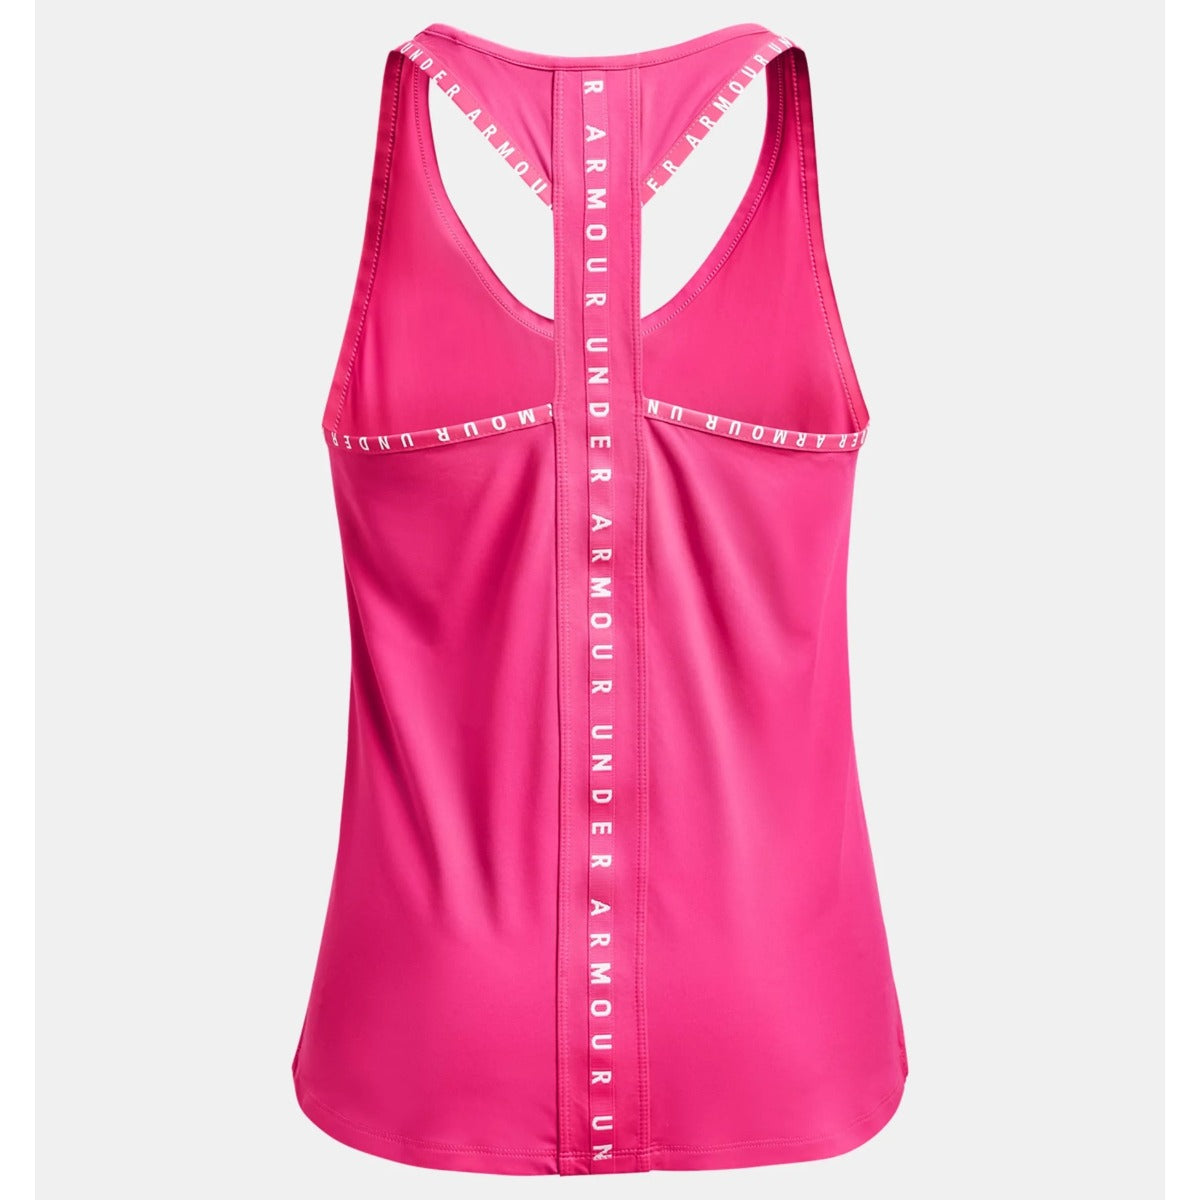 Under Armour Knockout Tank Top Womens (Pink 695)